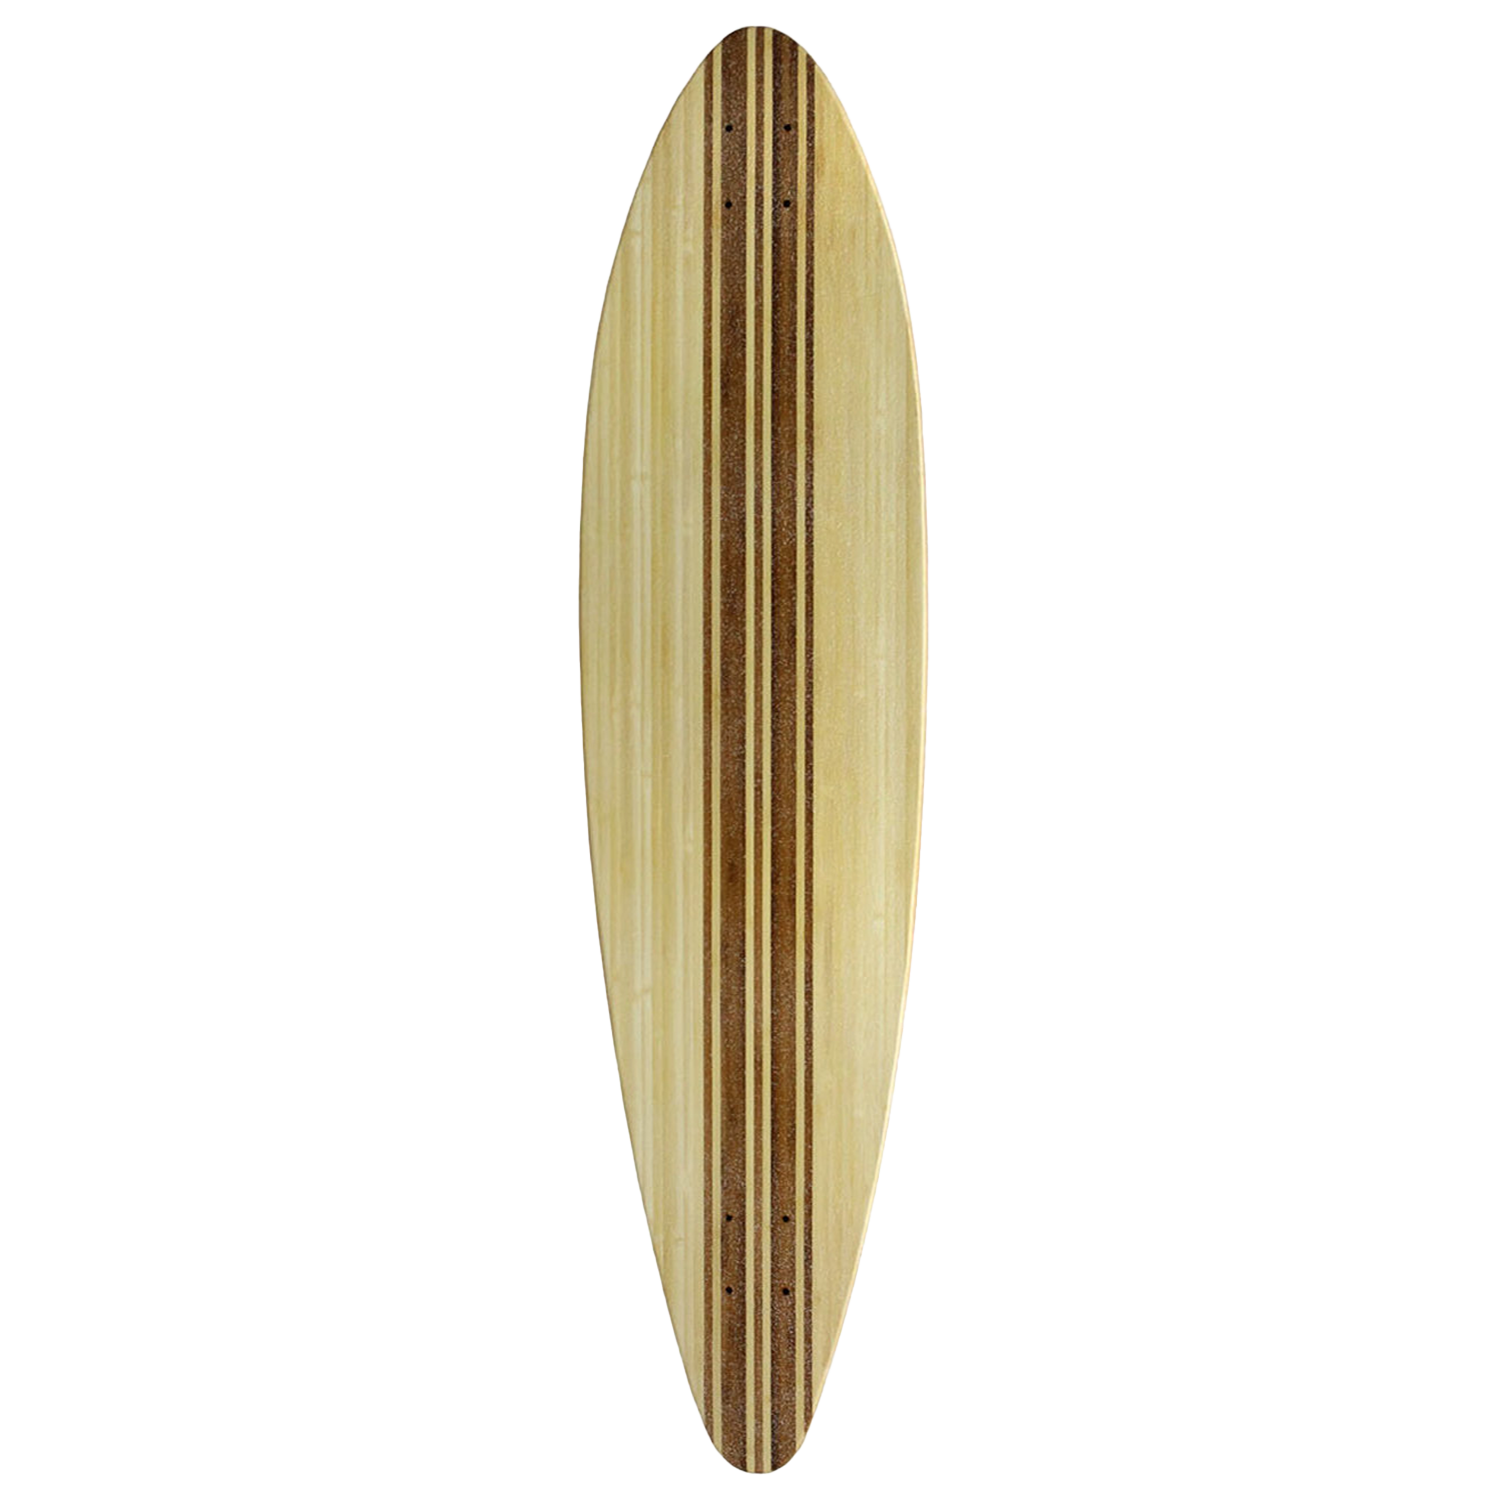 Moose Longboard Pintail Deck Top Ply Bamboo 9.5in x 41in